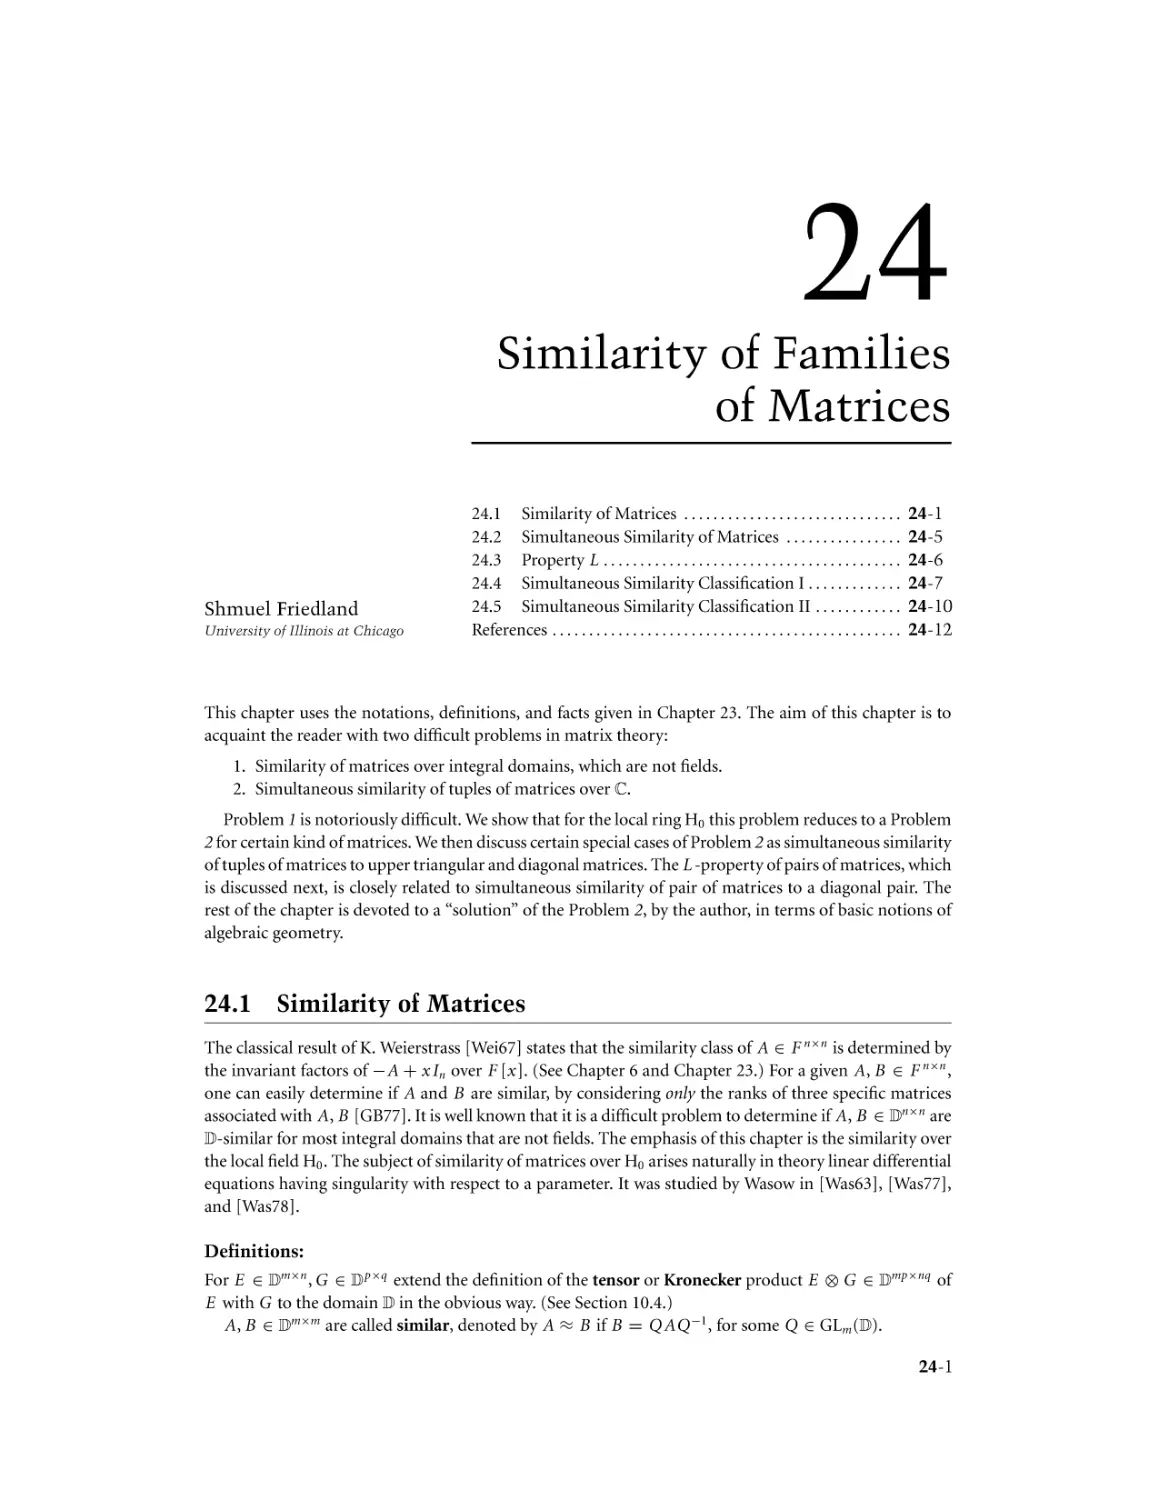 Chapter 24. Similarity of Families of Matrices